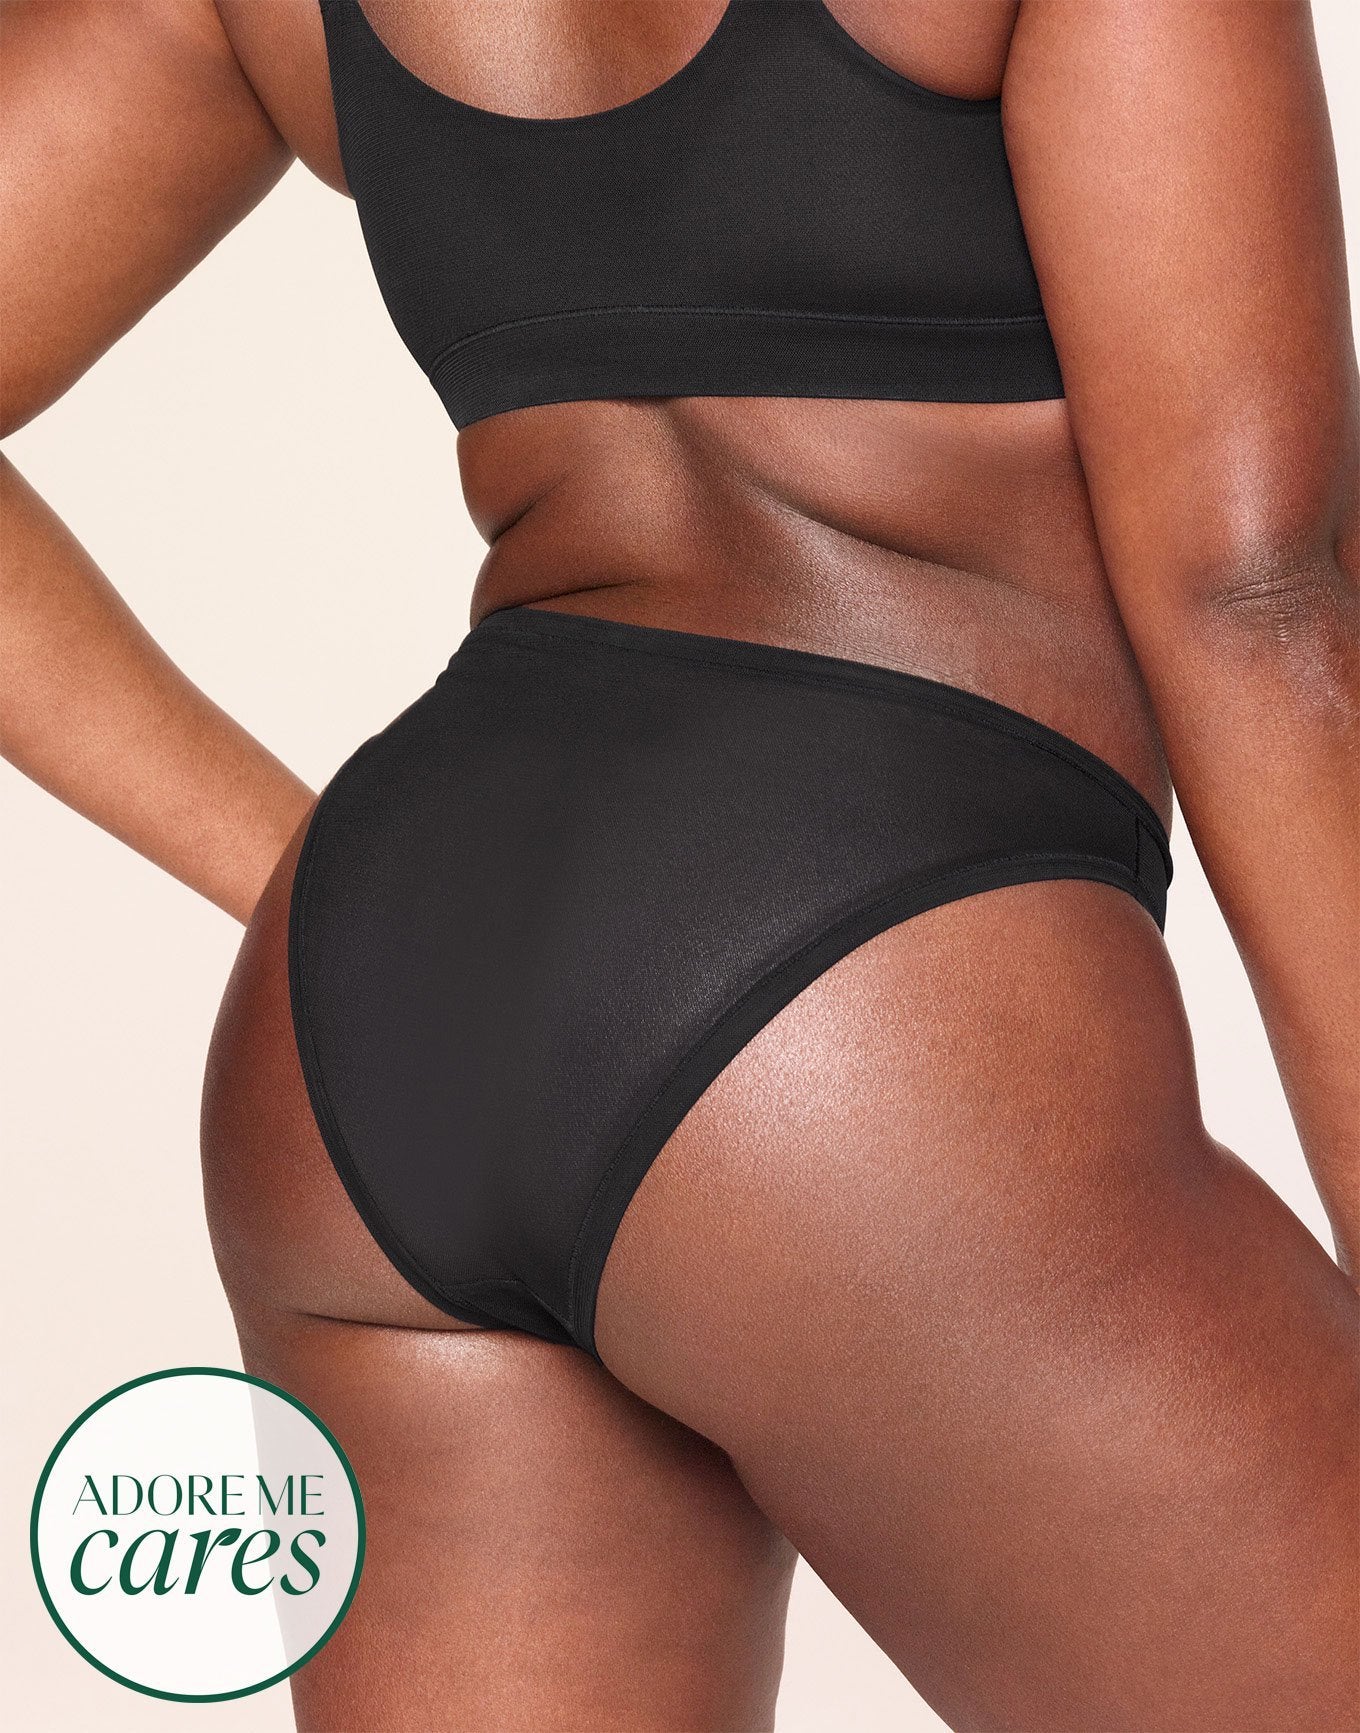 nueskin Zoe Mesh Mid-Rise Cheeky Brief in color Jet Black and shape midi brief